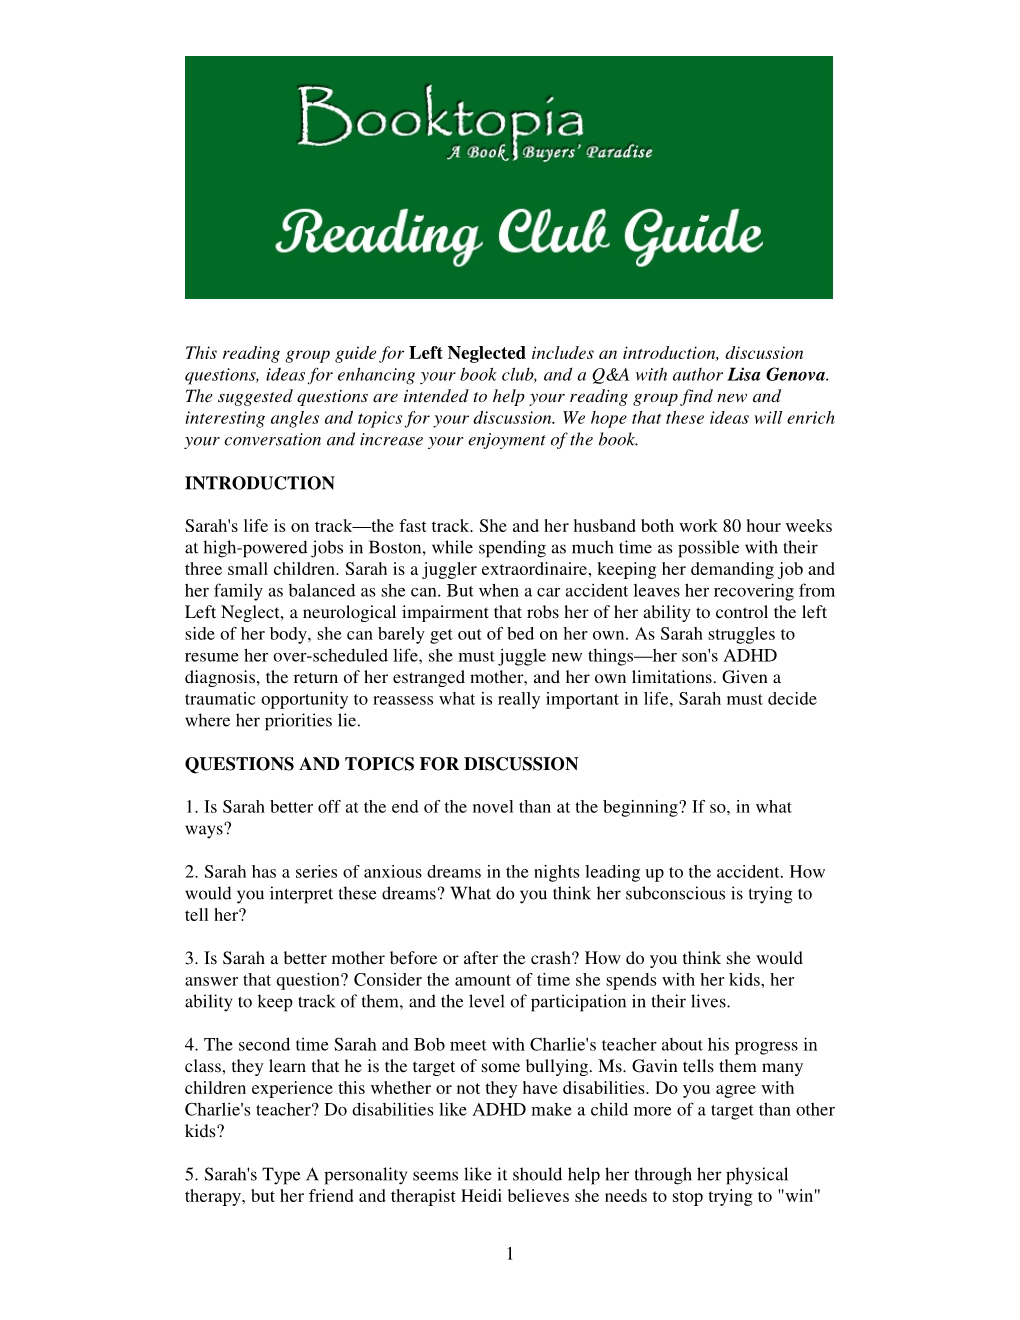 1 This Reading Group Guide for Left Neglected Includes an Introduction